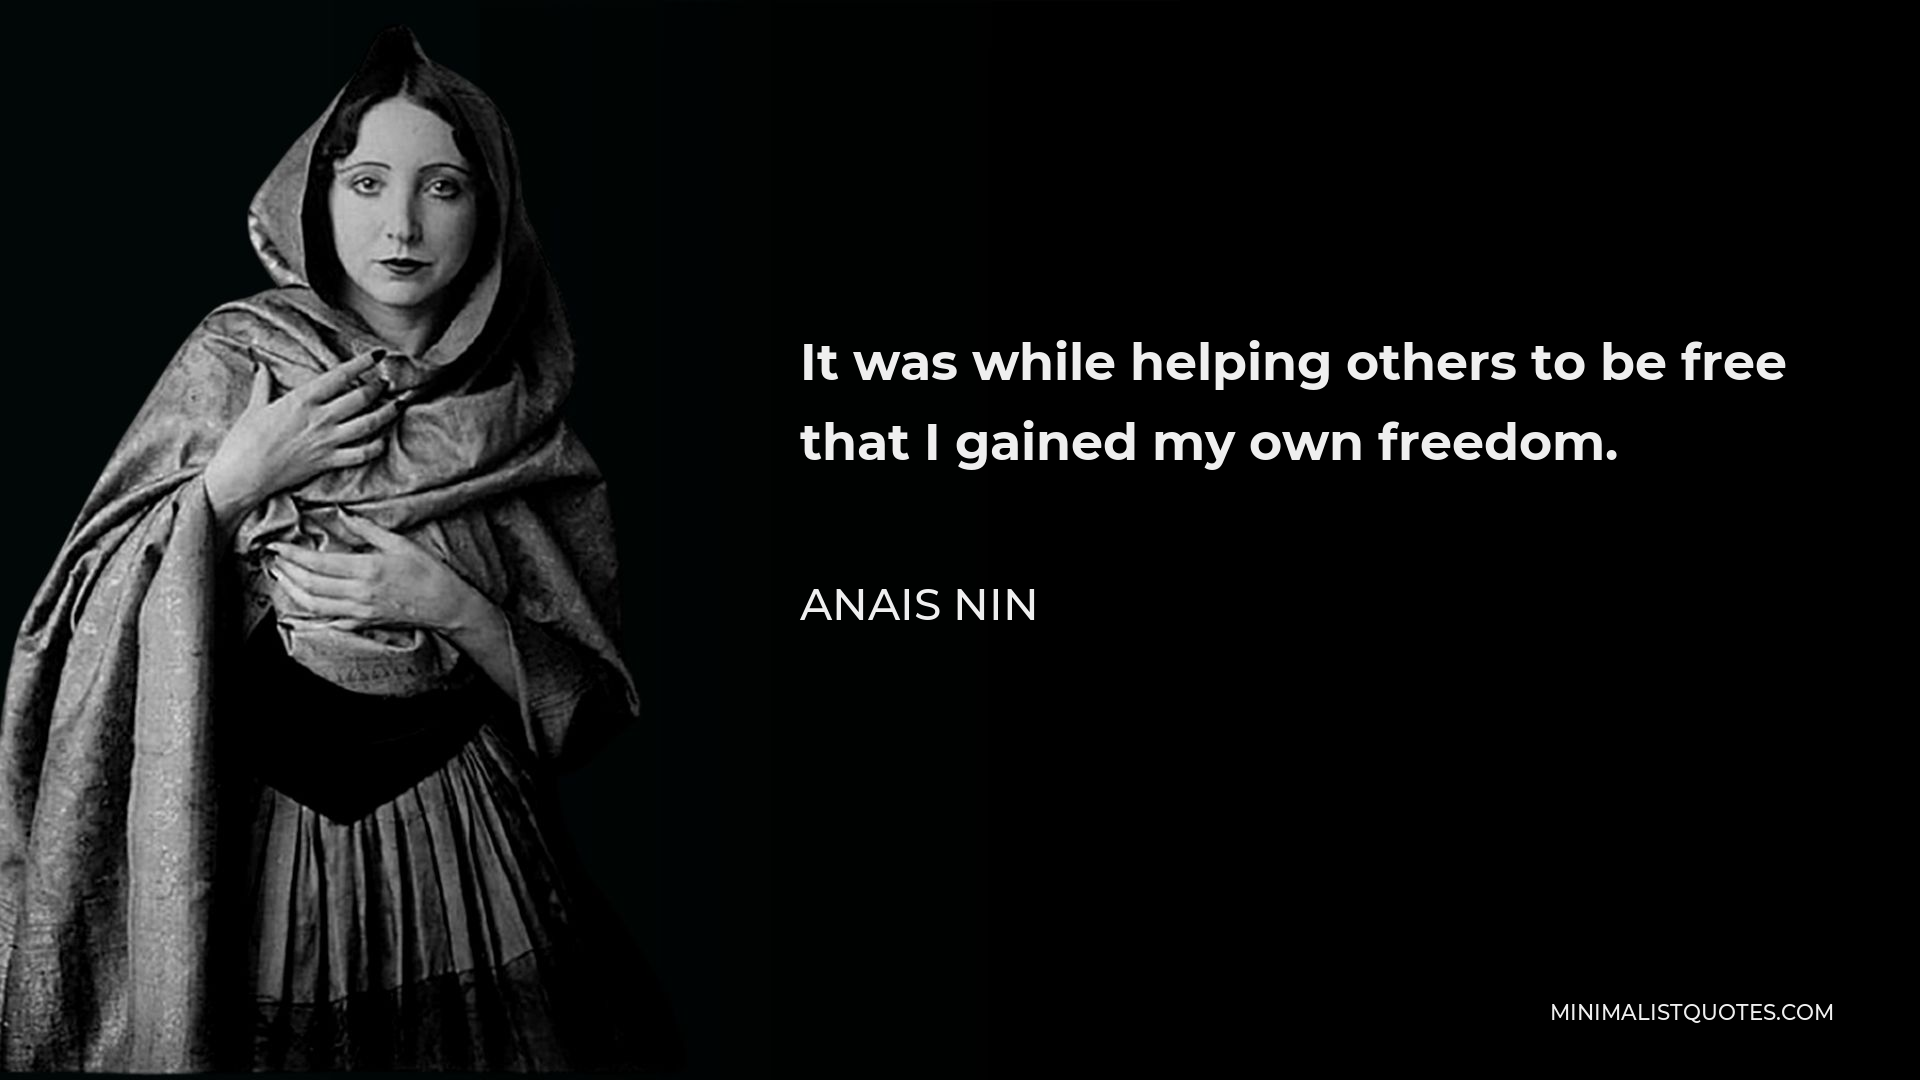 Anais Nin Quote - It was while helping others to be free that I gained my own freedom.